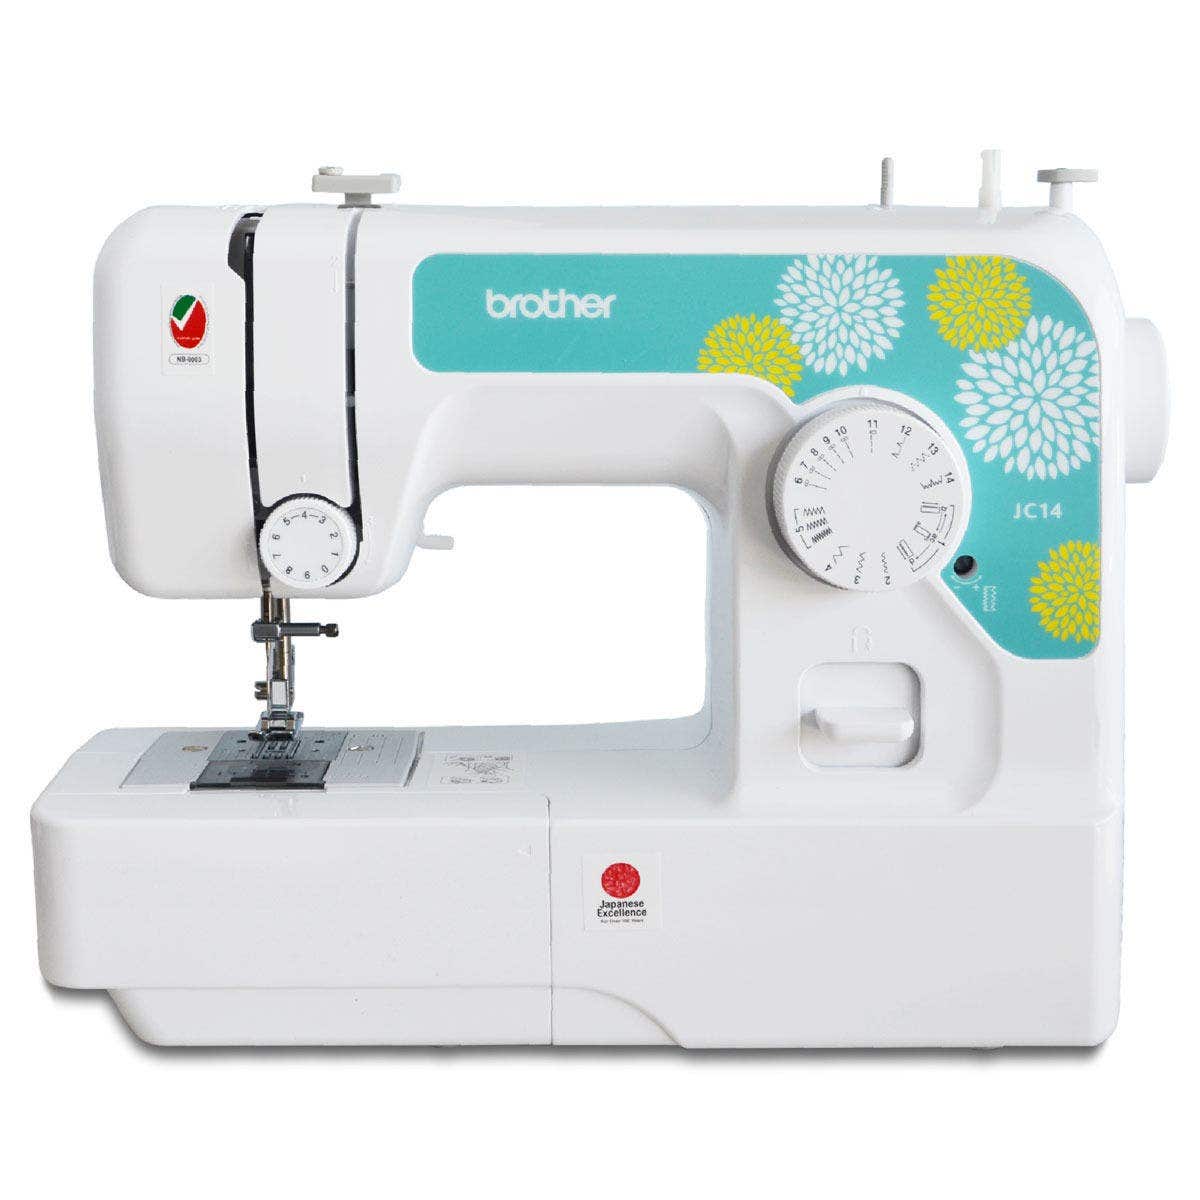 Brother JC14 Household Sewing Machine